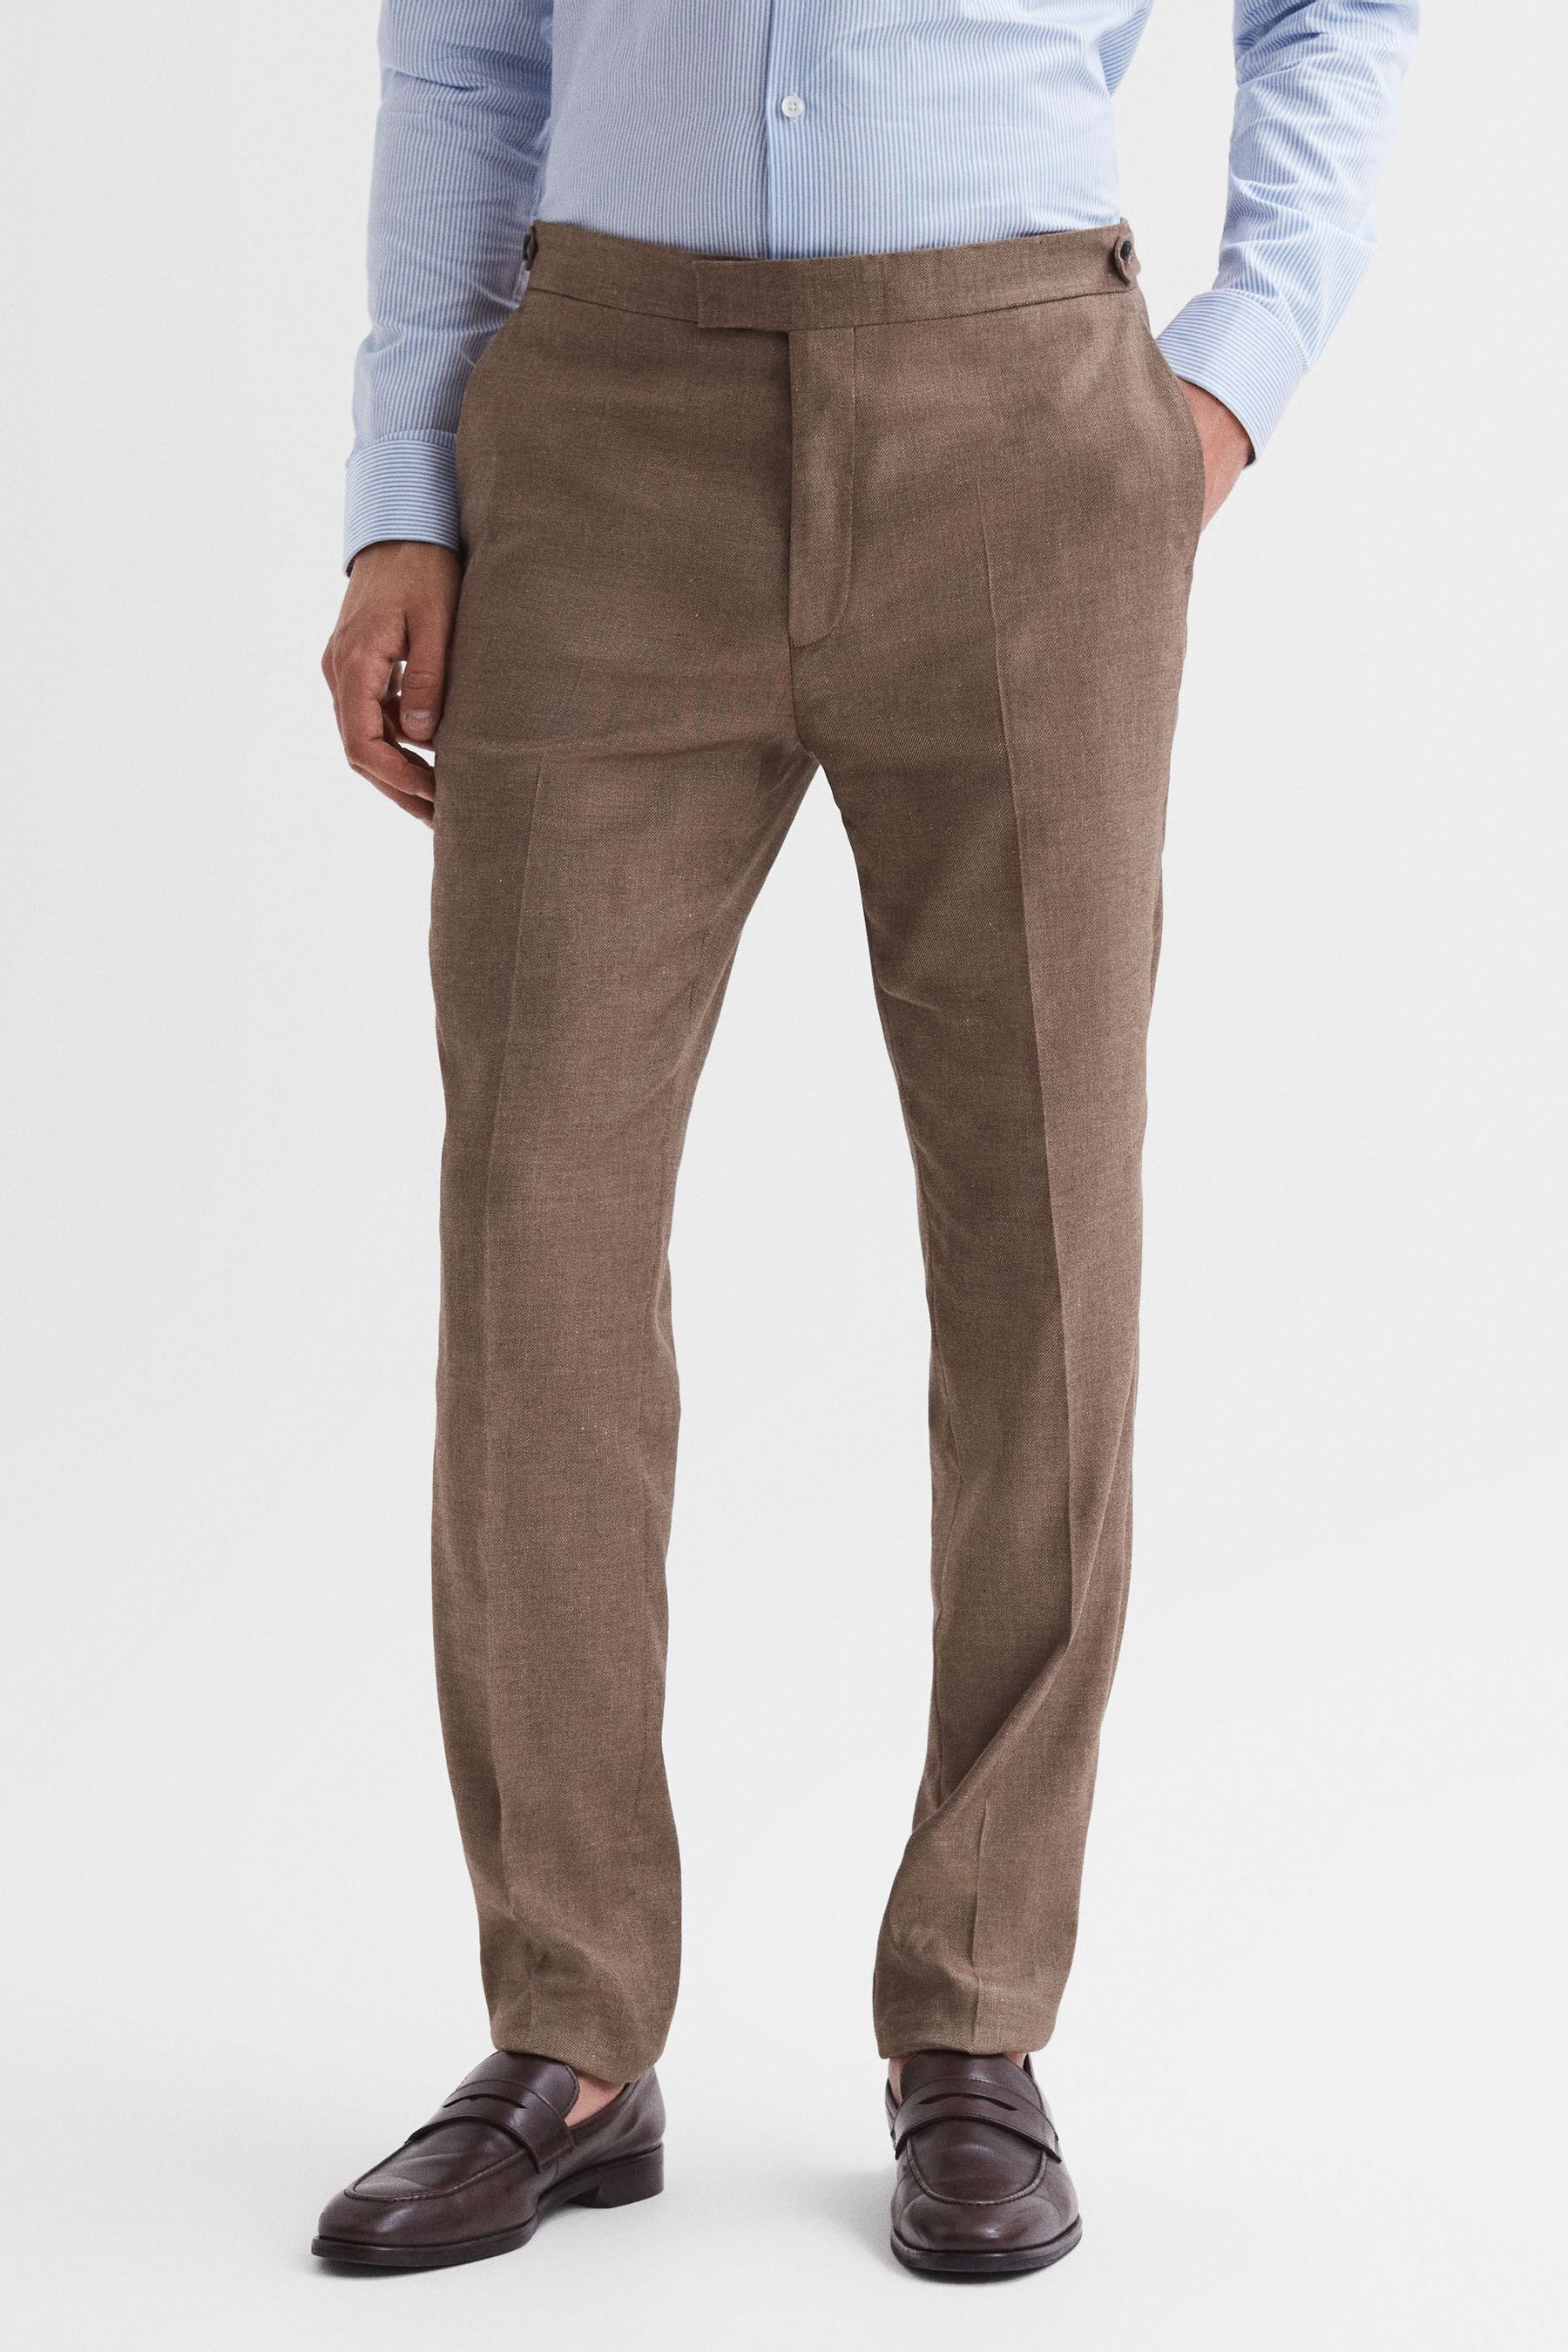 Buy Reiss Tobacco Paddock Twill Side Adjuster Trousers from the Next UK ...